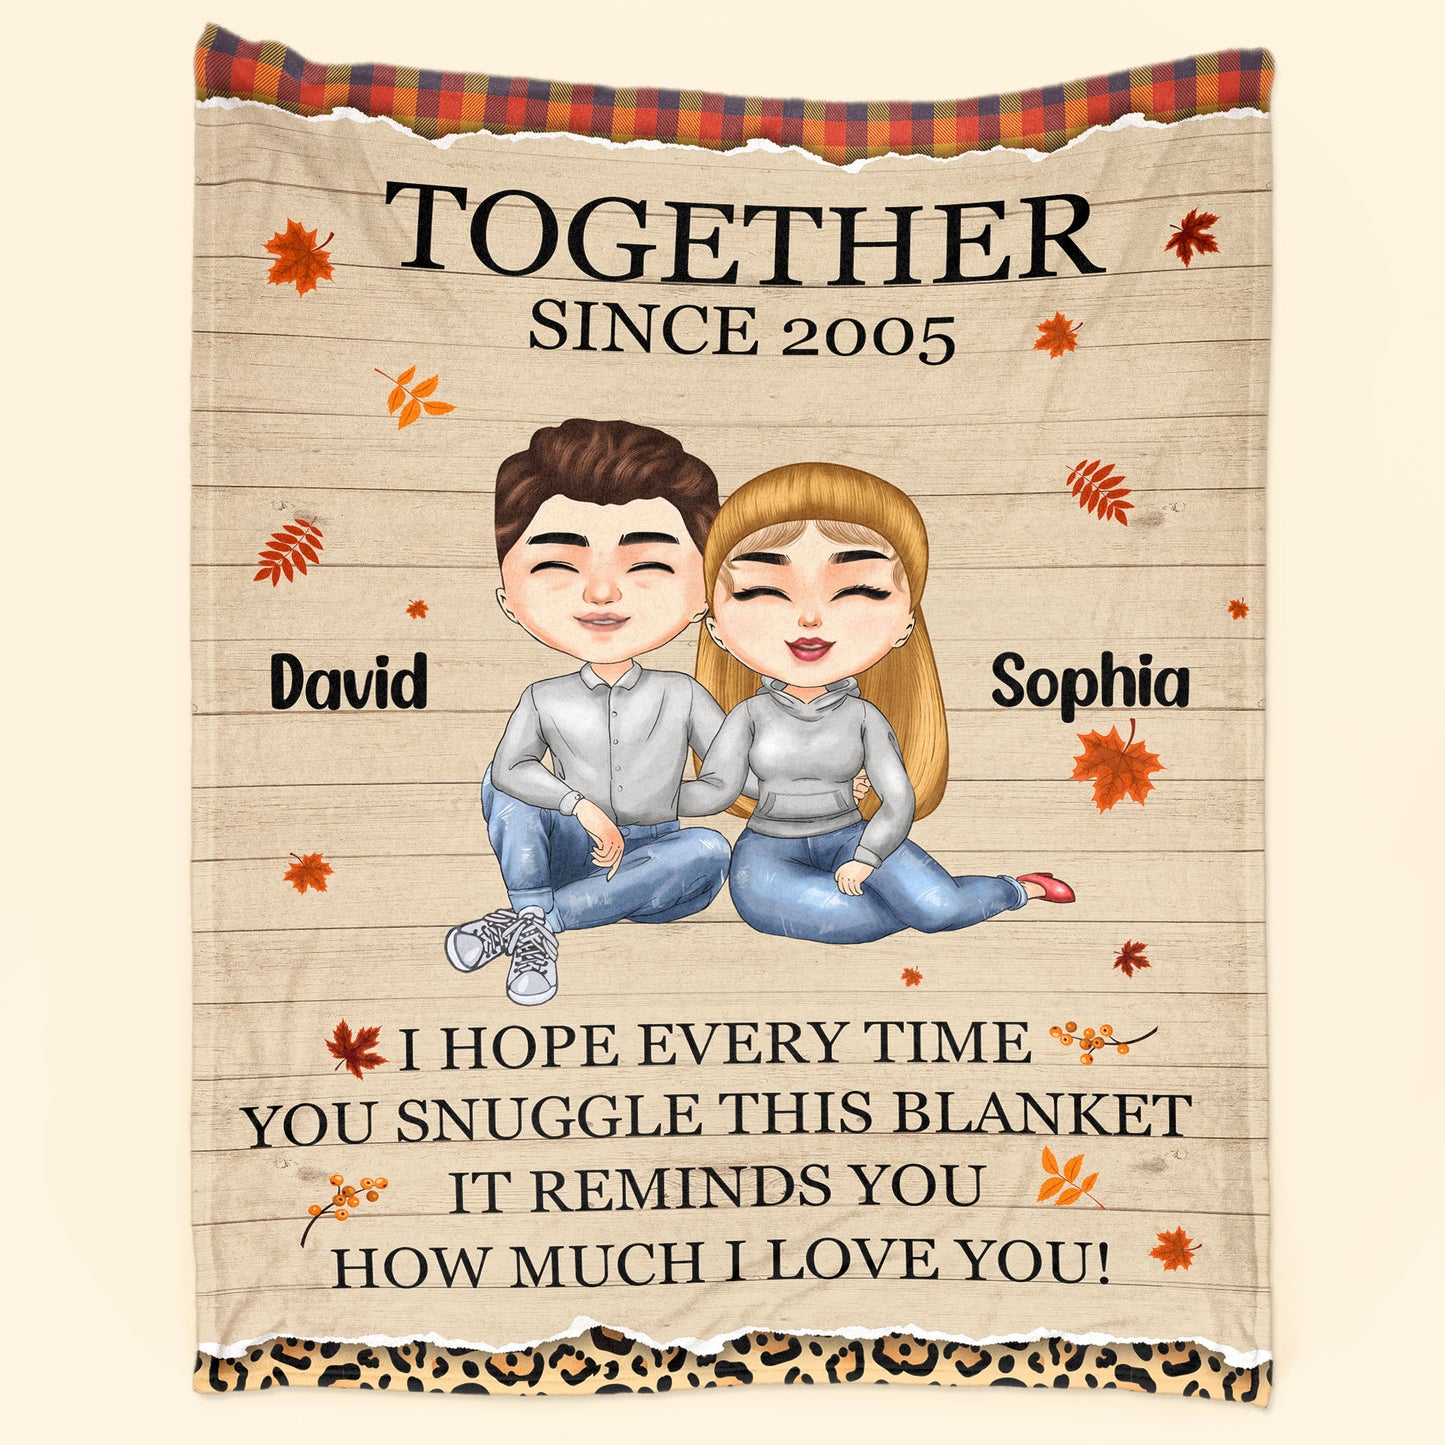 This Blanket Reminds You How Much I Love You - Personalized Blanket - Birthday Anniversary Gift For Couples, Husband, Wife